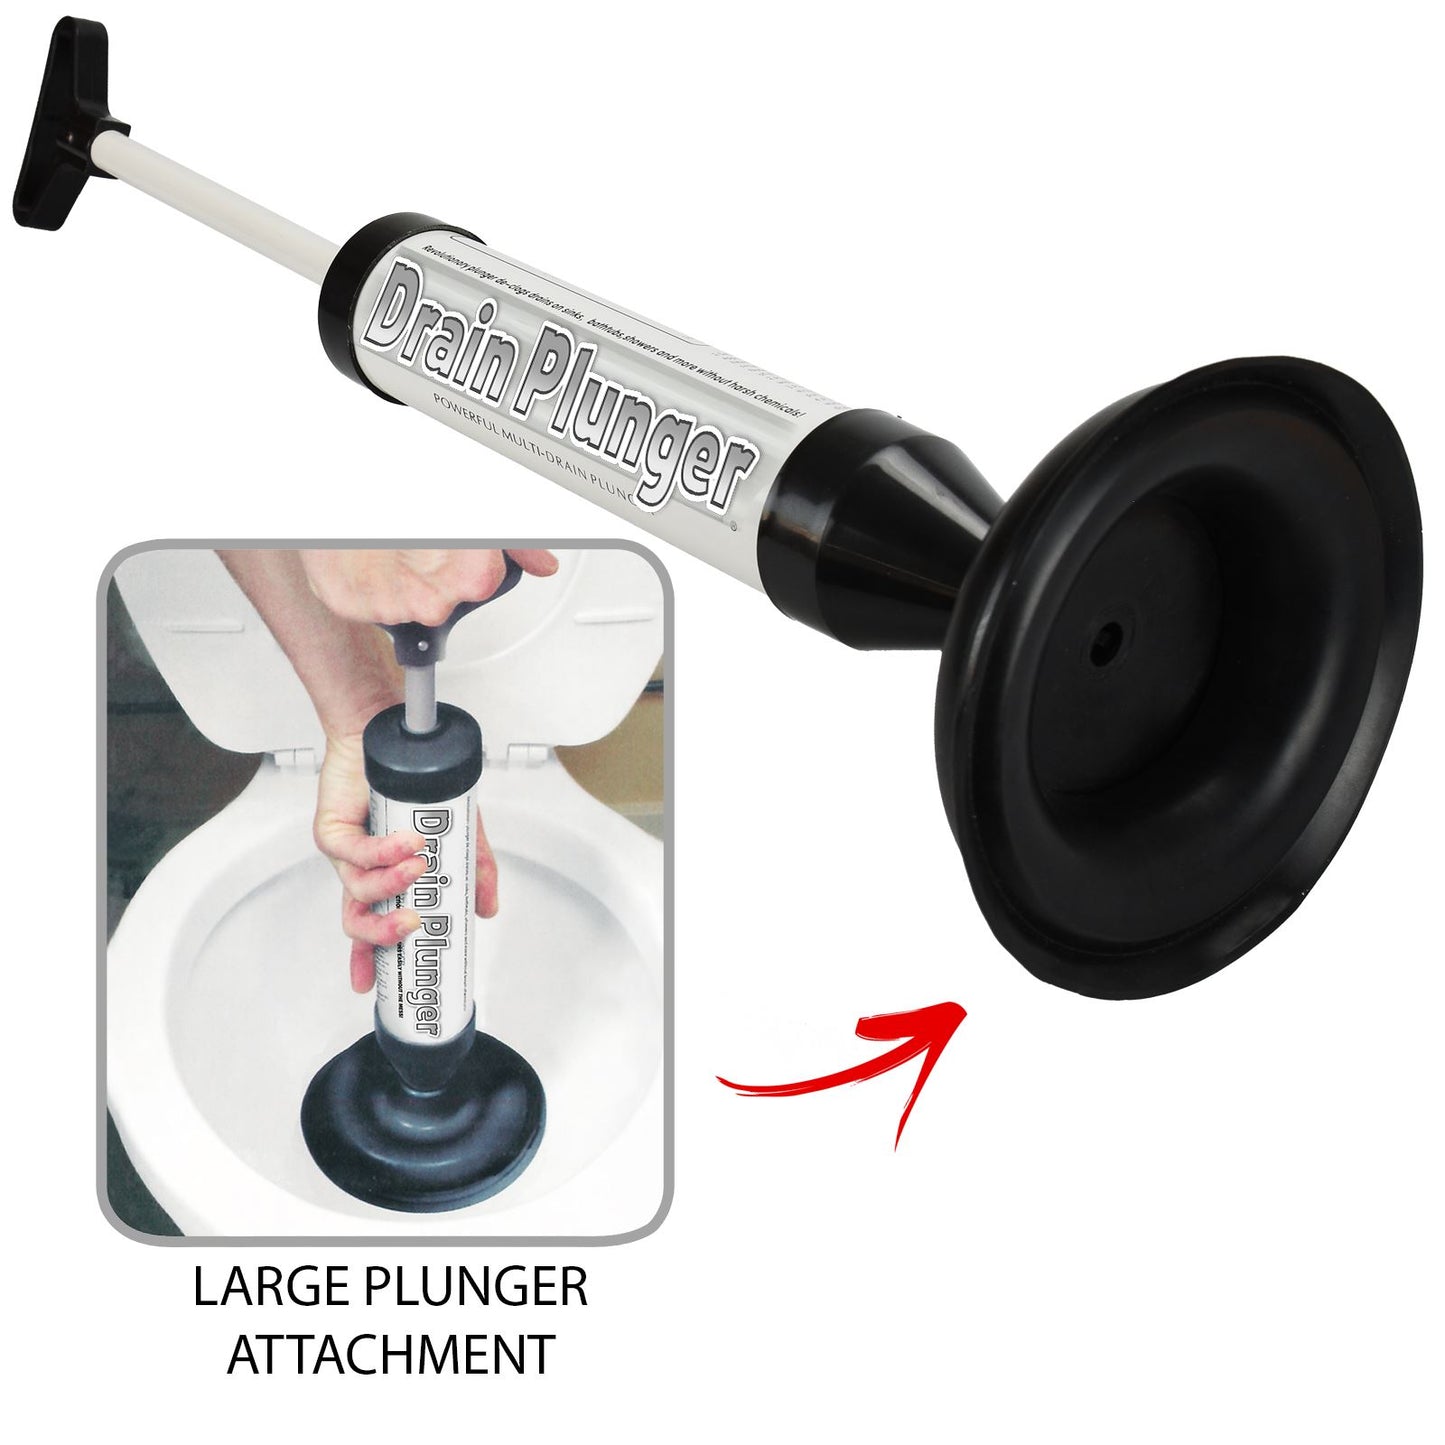 Unblock Your Toilet With This Powerful Drain Plunger